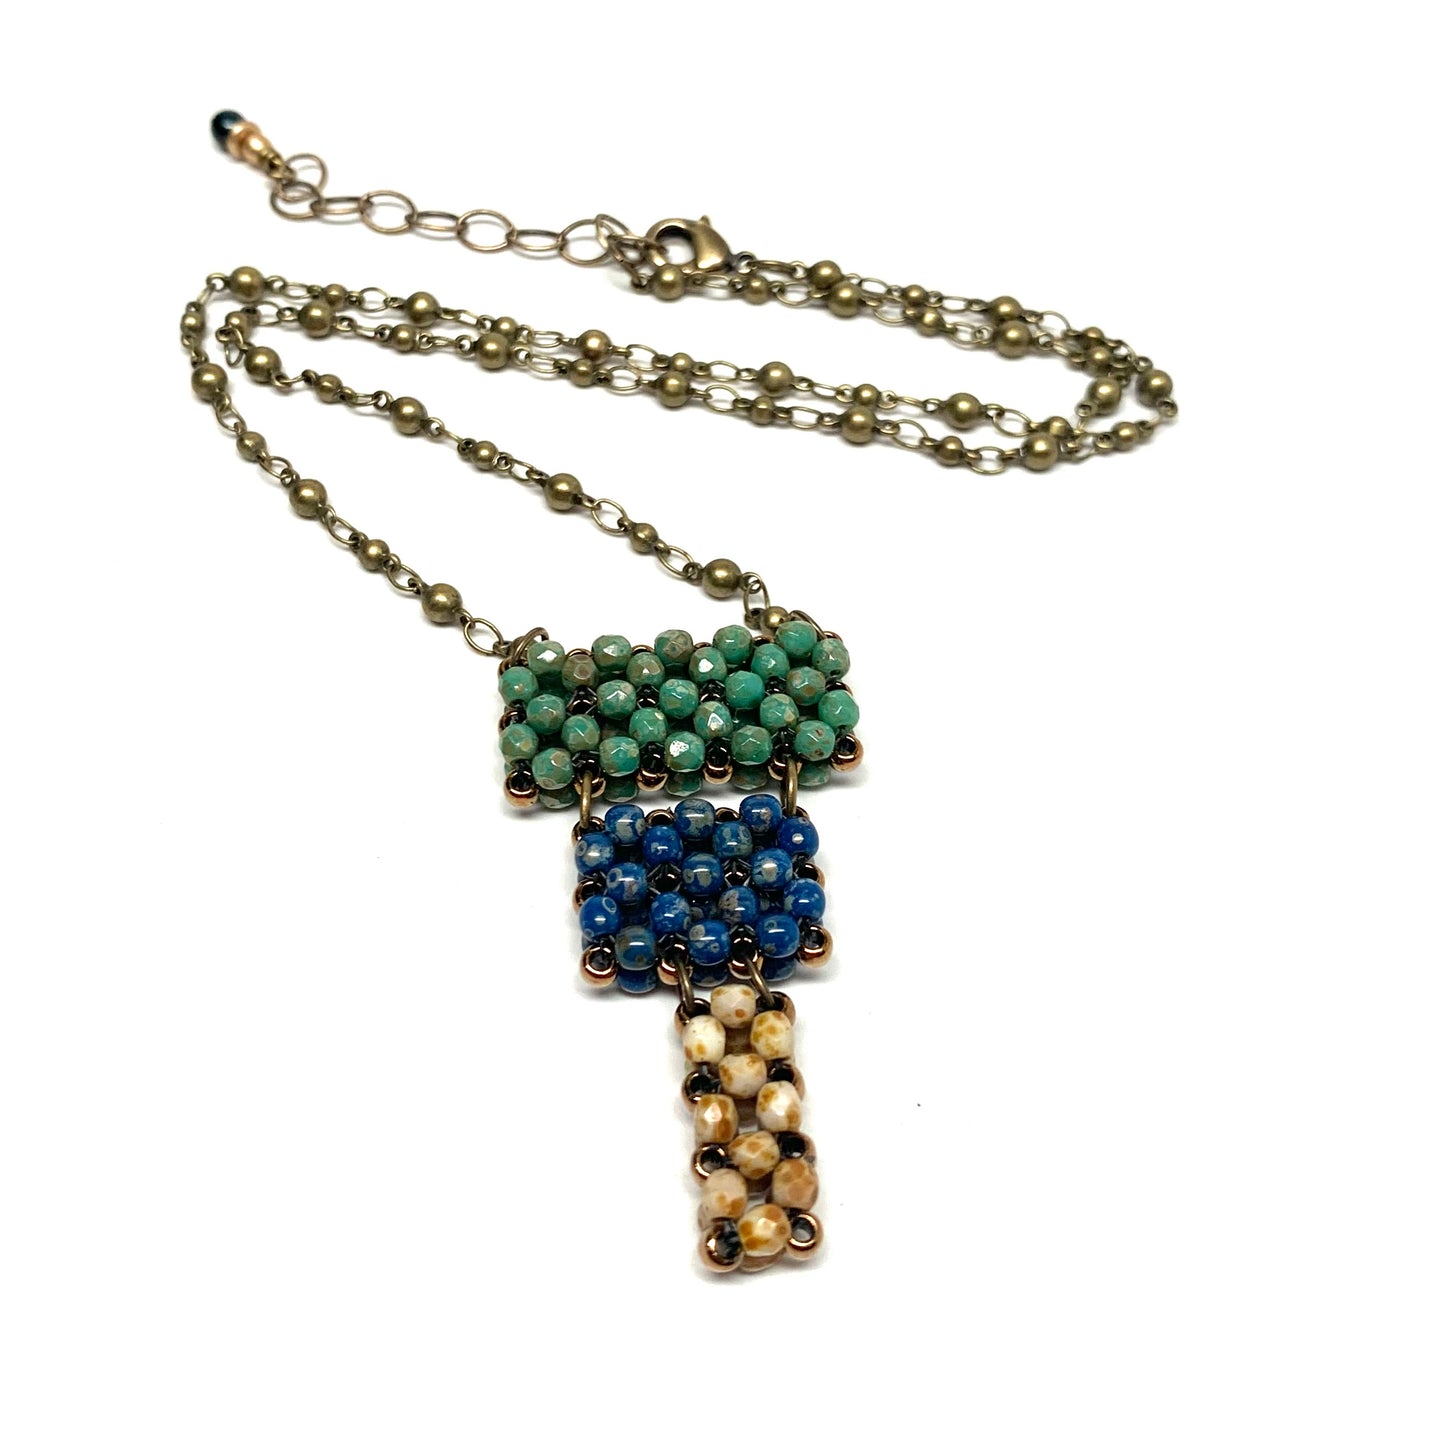 Link Necklace | Three Link Drop | Blue Green Picasso